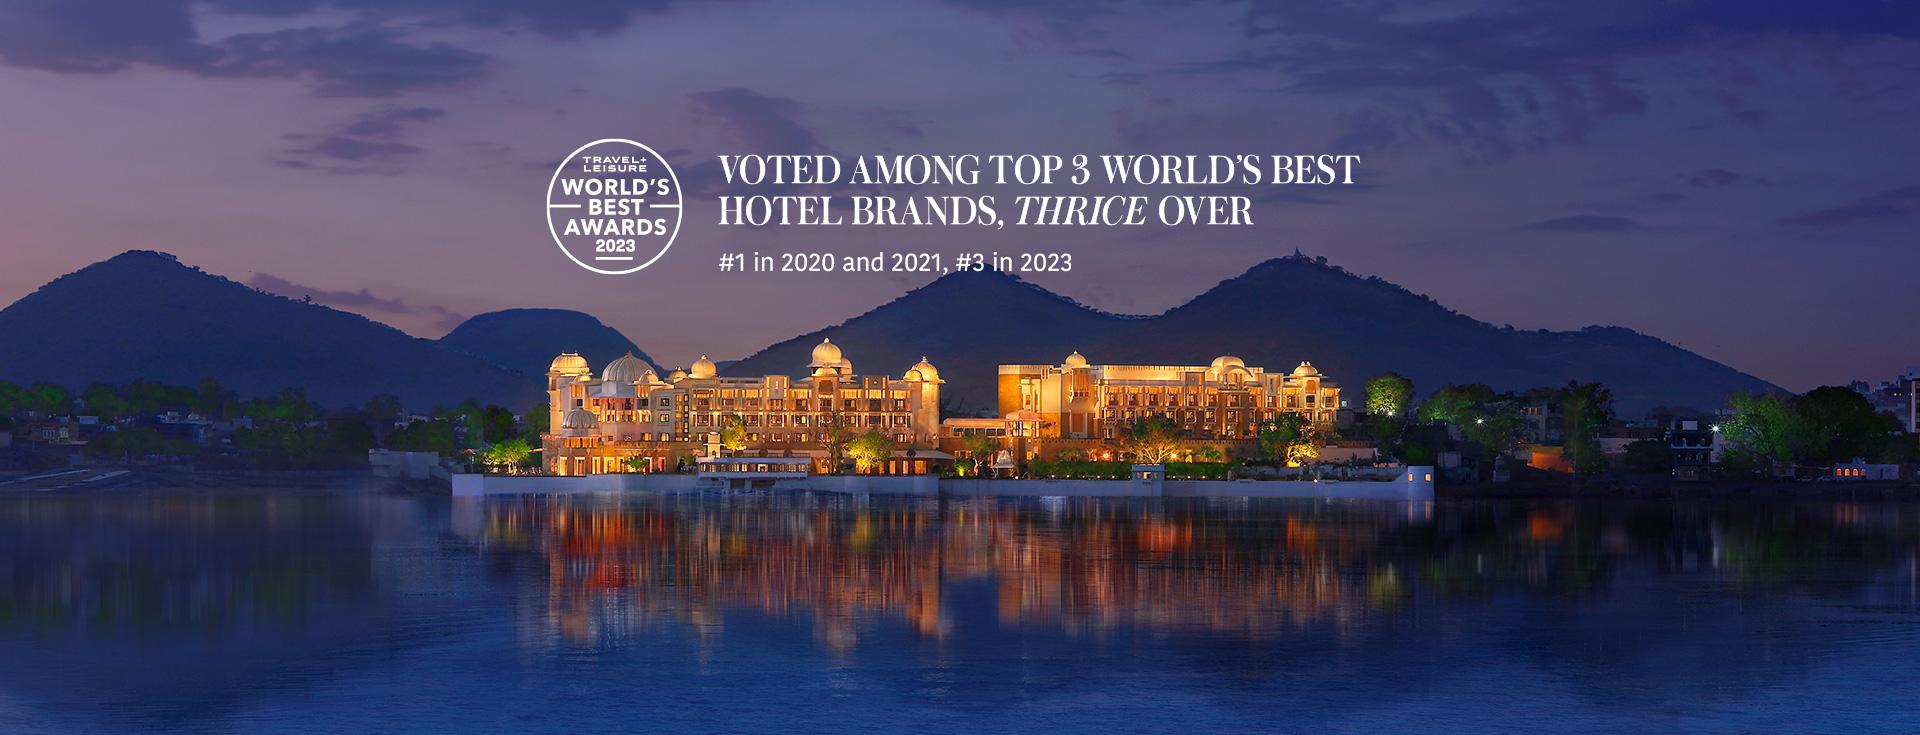 The Leela Palaces, Hotels and Resorts voted among the top 3 World’s Best Hotel Brands by the Readers of Travel+Leisure USA 2023